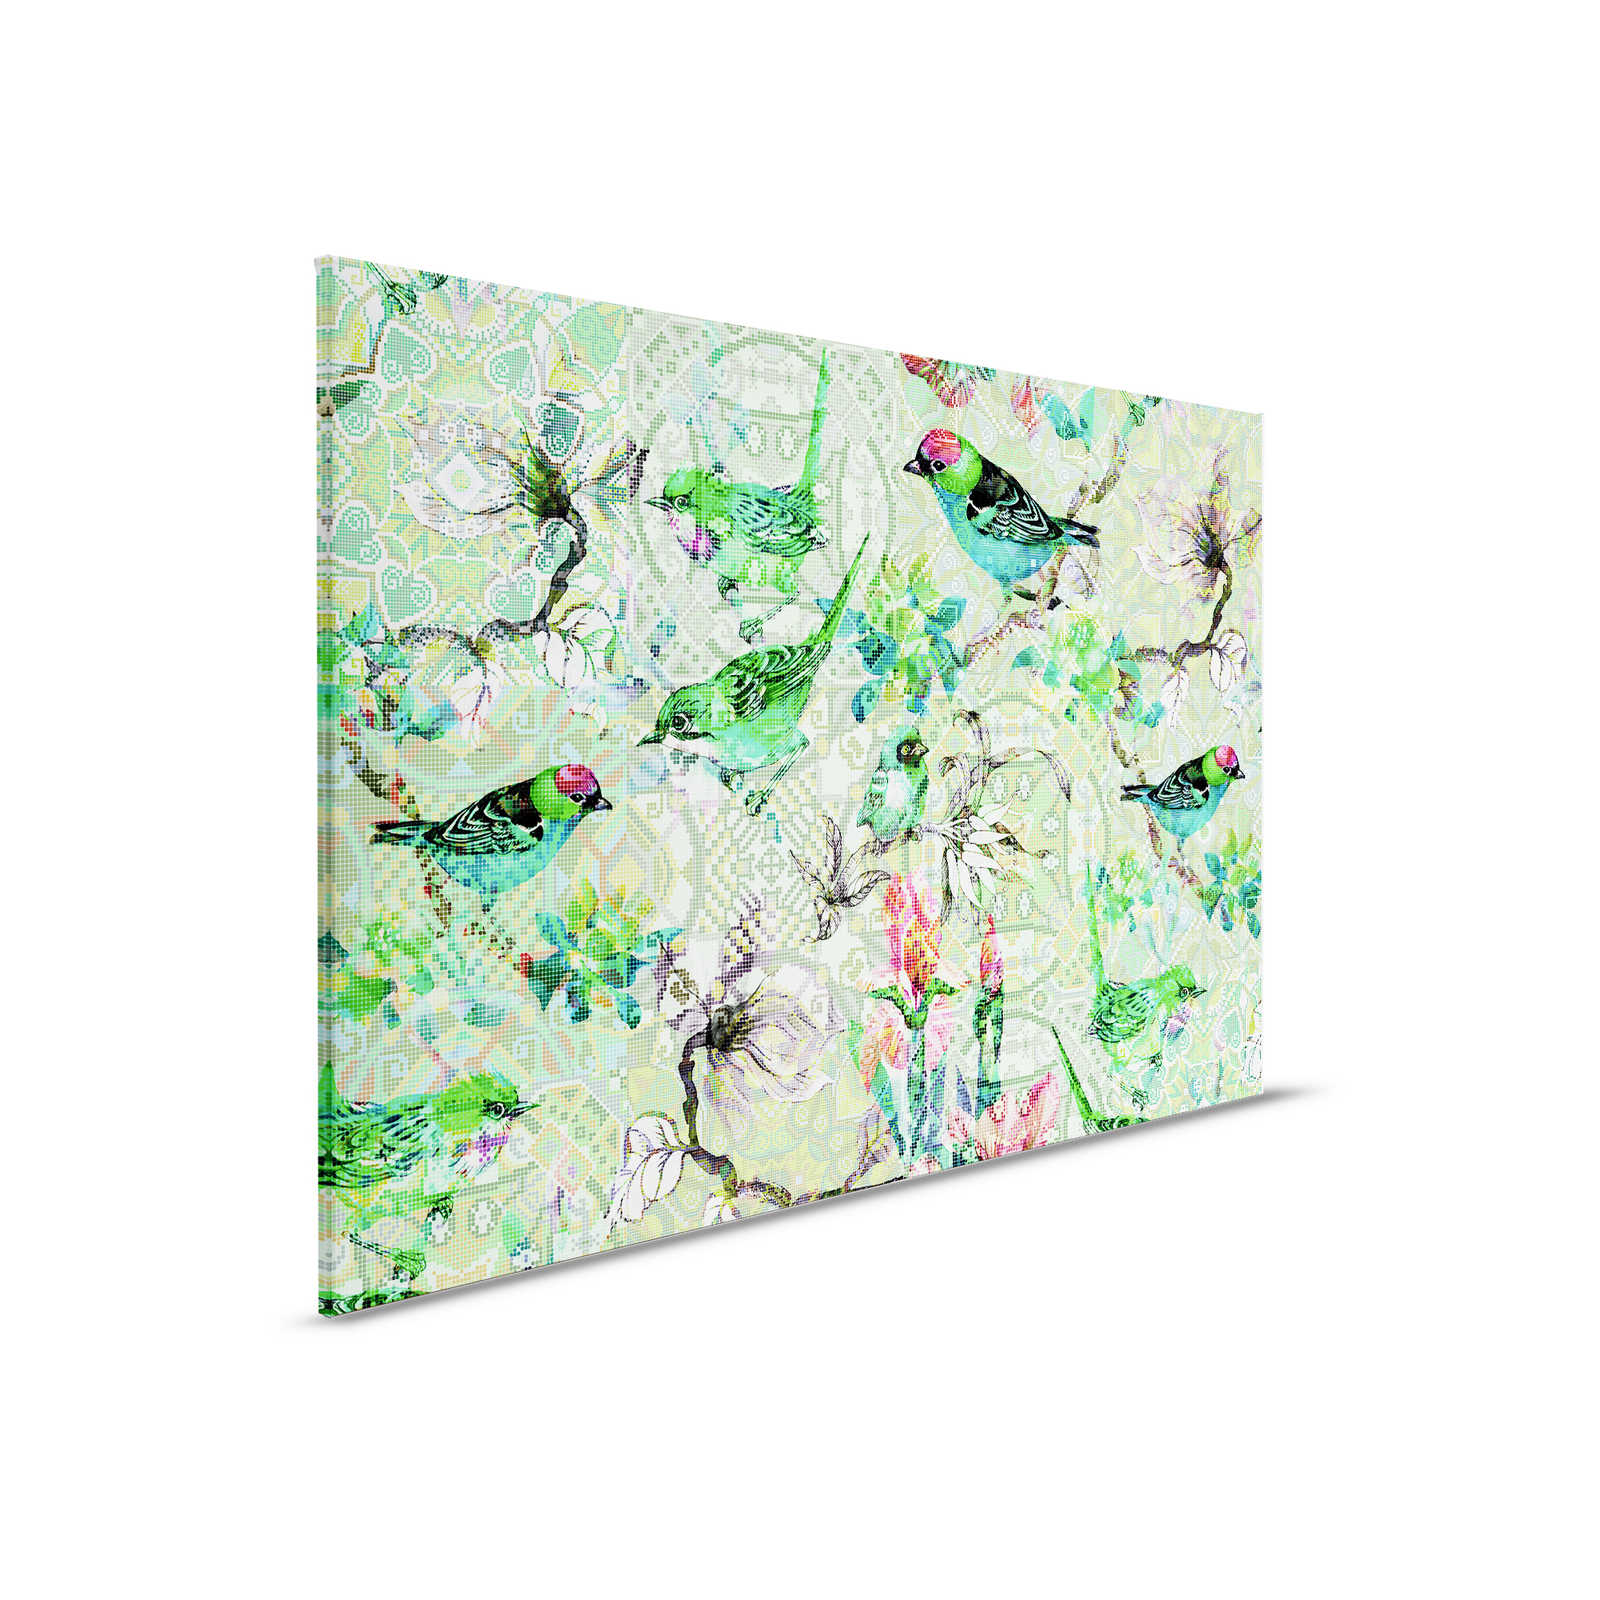         Bird Canvas Painting Green with Mosaic Pattern - 0.90 m x 0.60 m
    